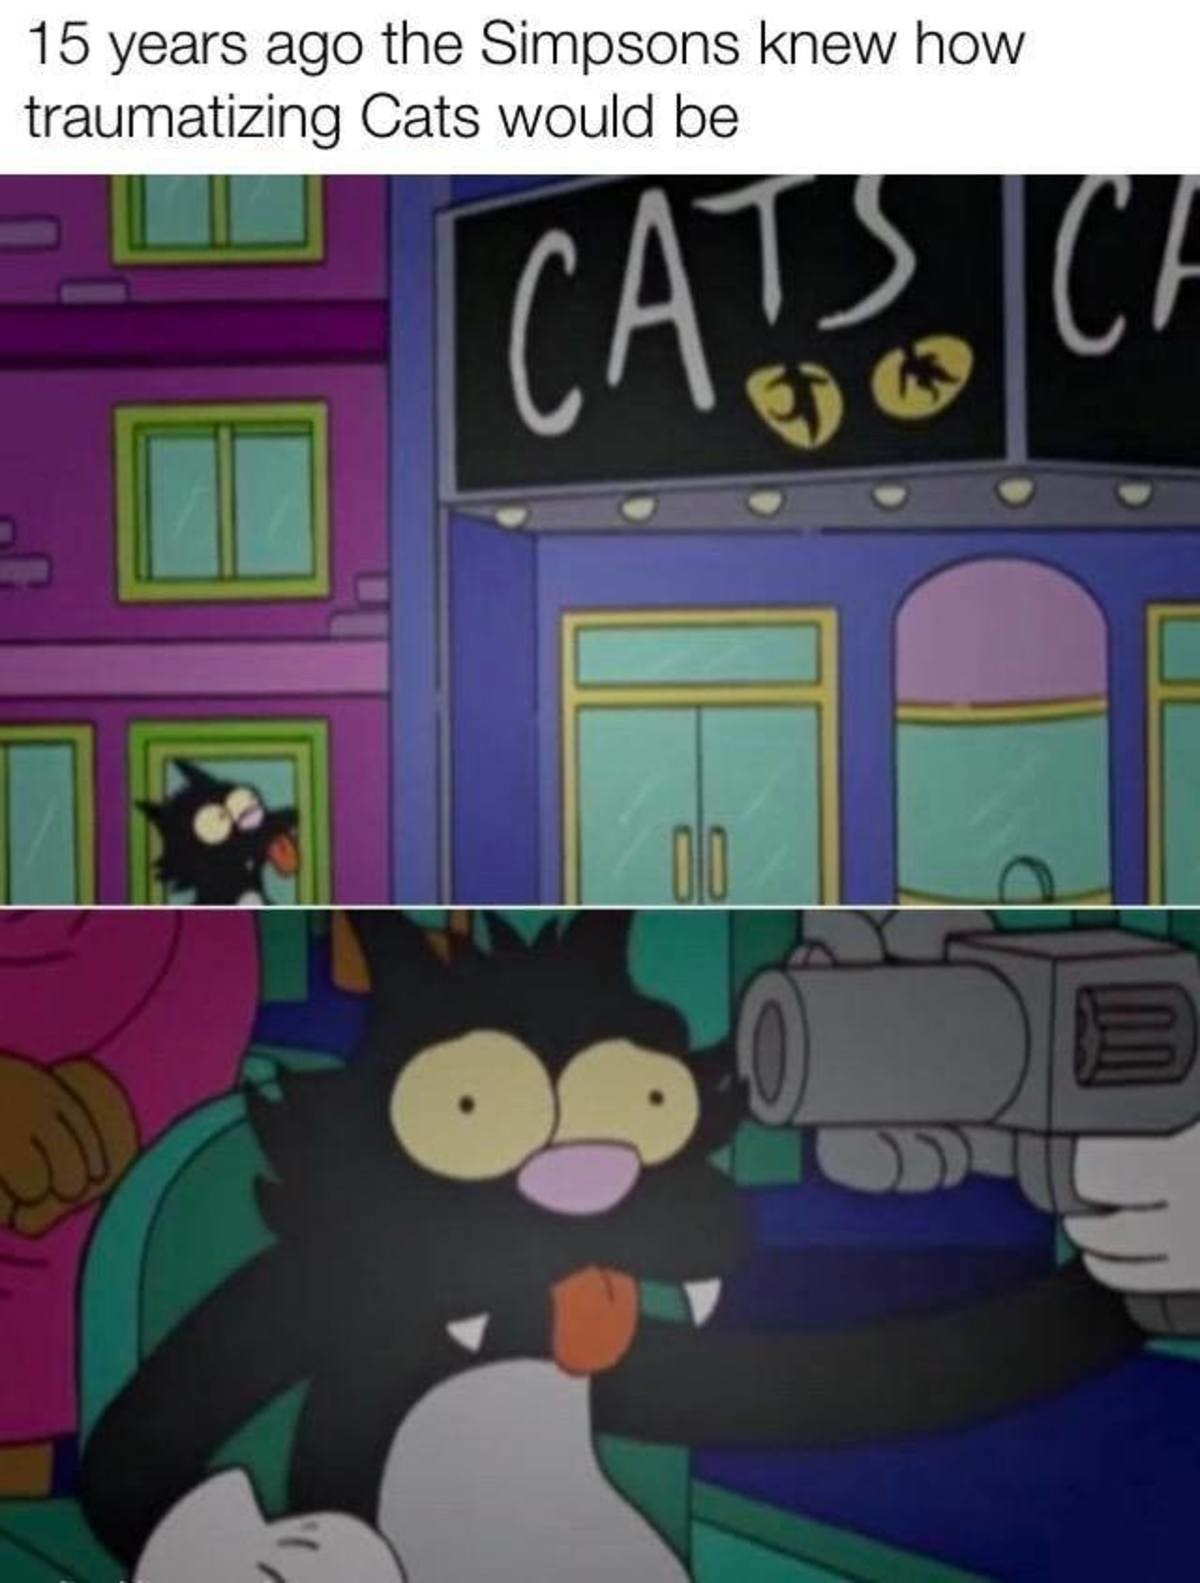 They always knew. .. CATS existed before the Simpsons, though